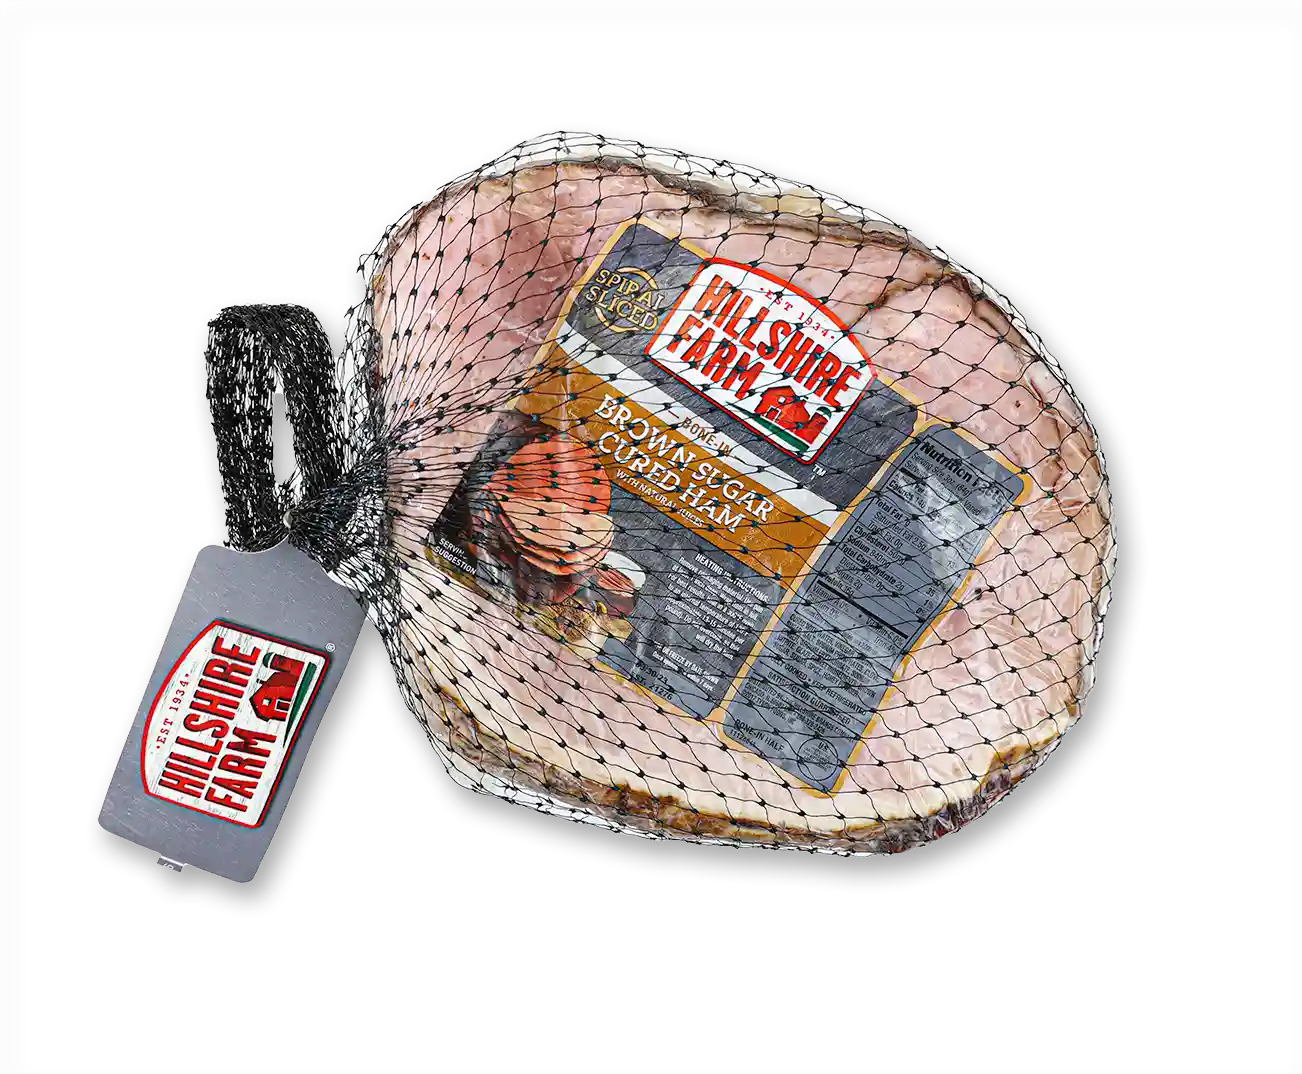 Hillshire Farm® Bone-In Brown Sugar Cured Spiral Sliced Half Ham with Natural Juices (4 Count)_image_21